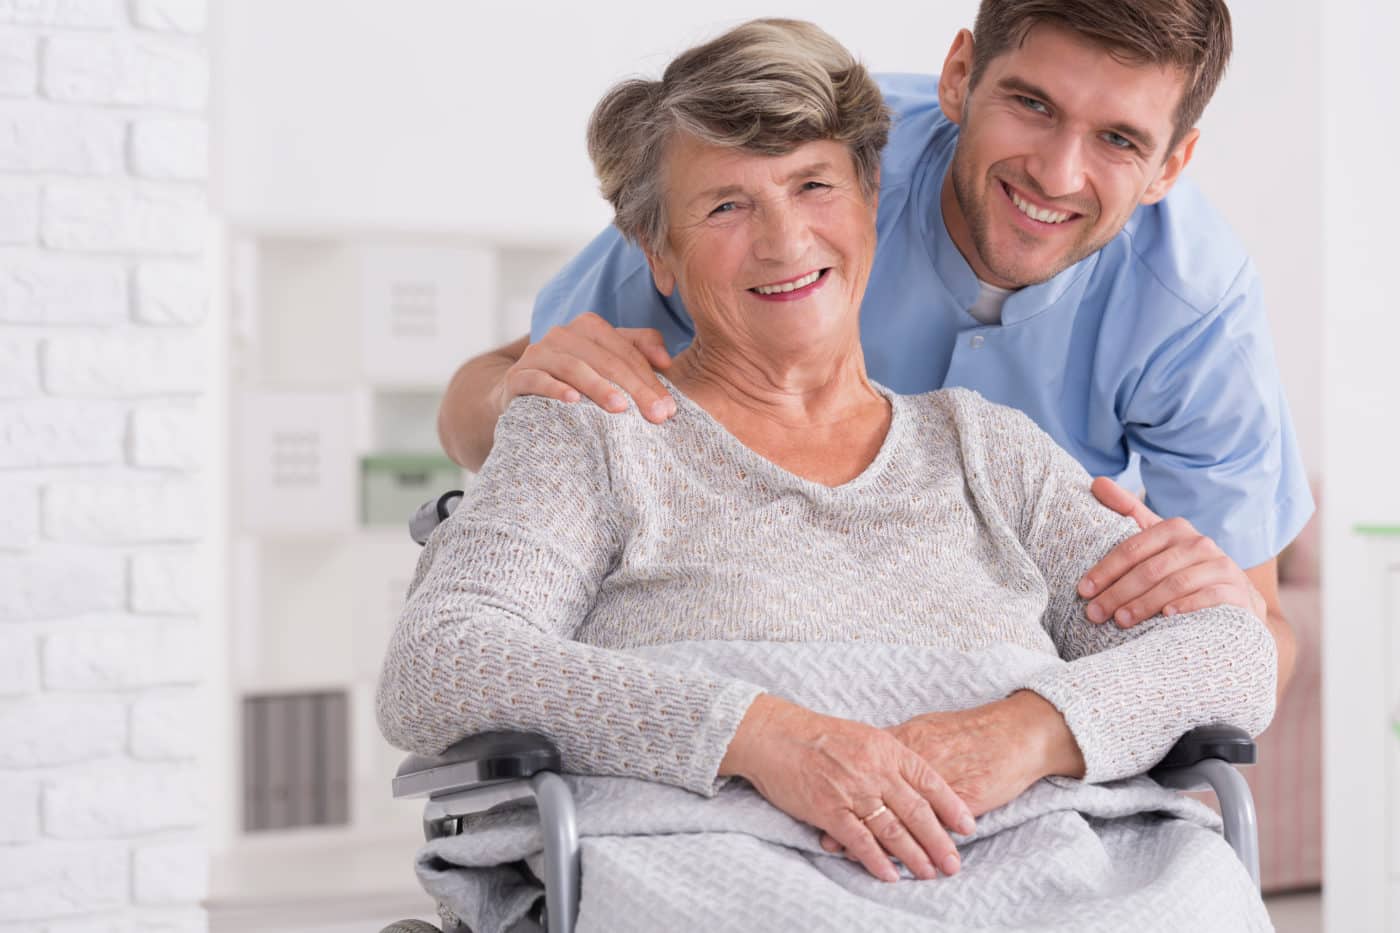 Senior care assistant with cheerful disabled woman in nursing home